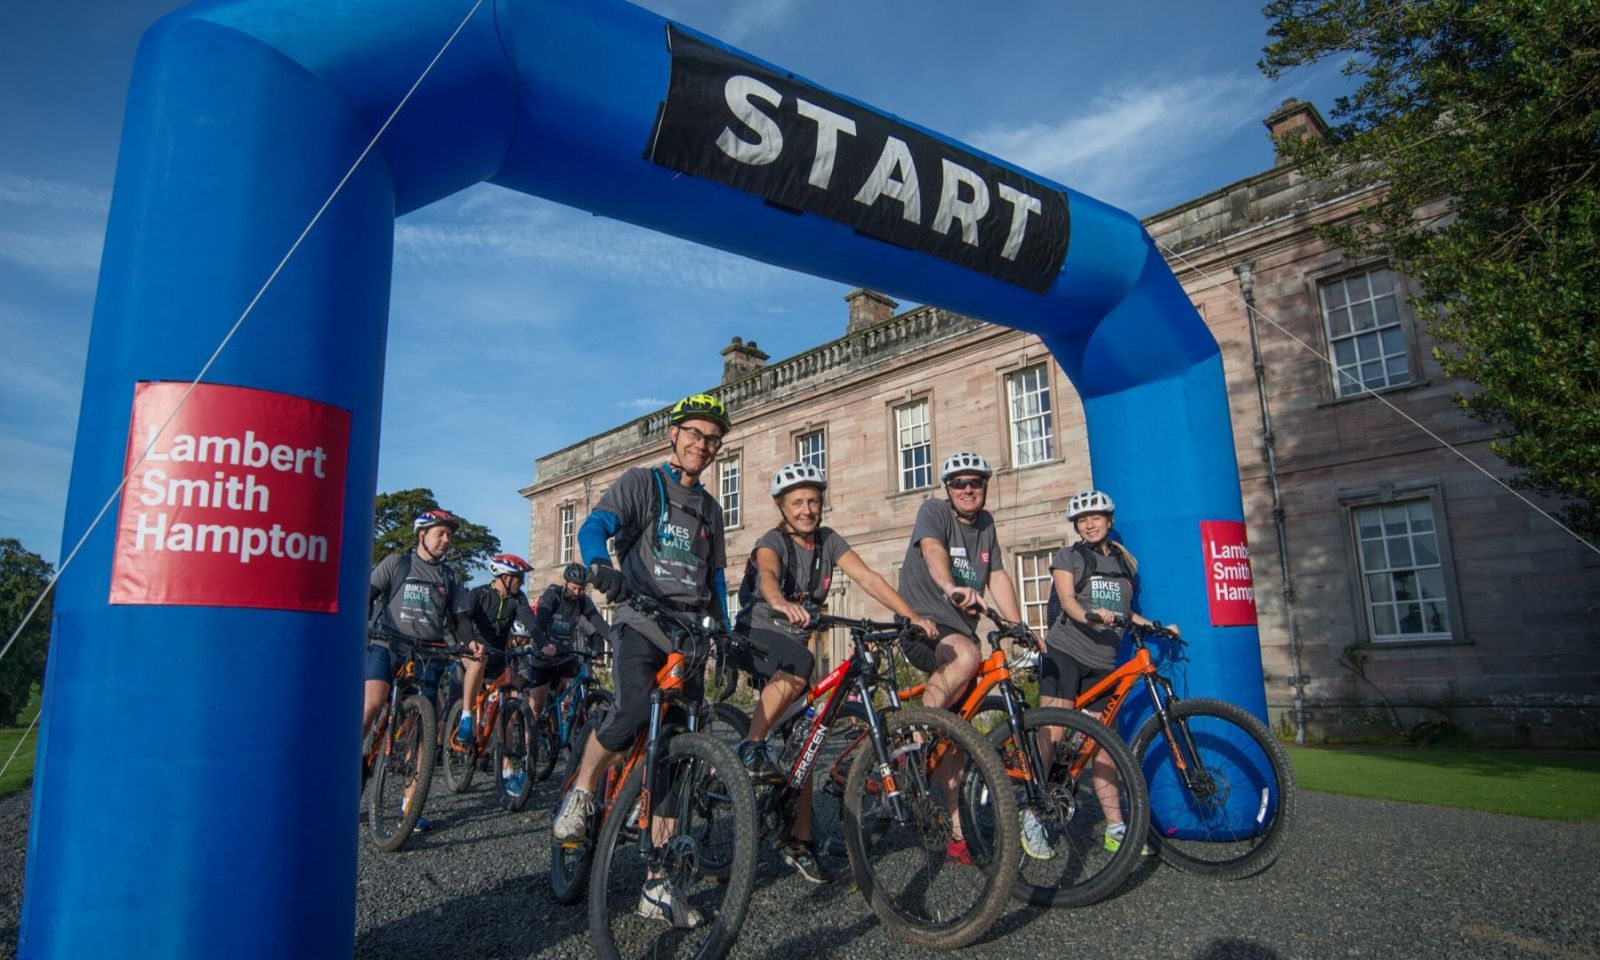 Cyclists grouped together under the start arch before a challenge event.